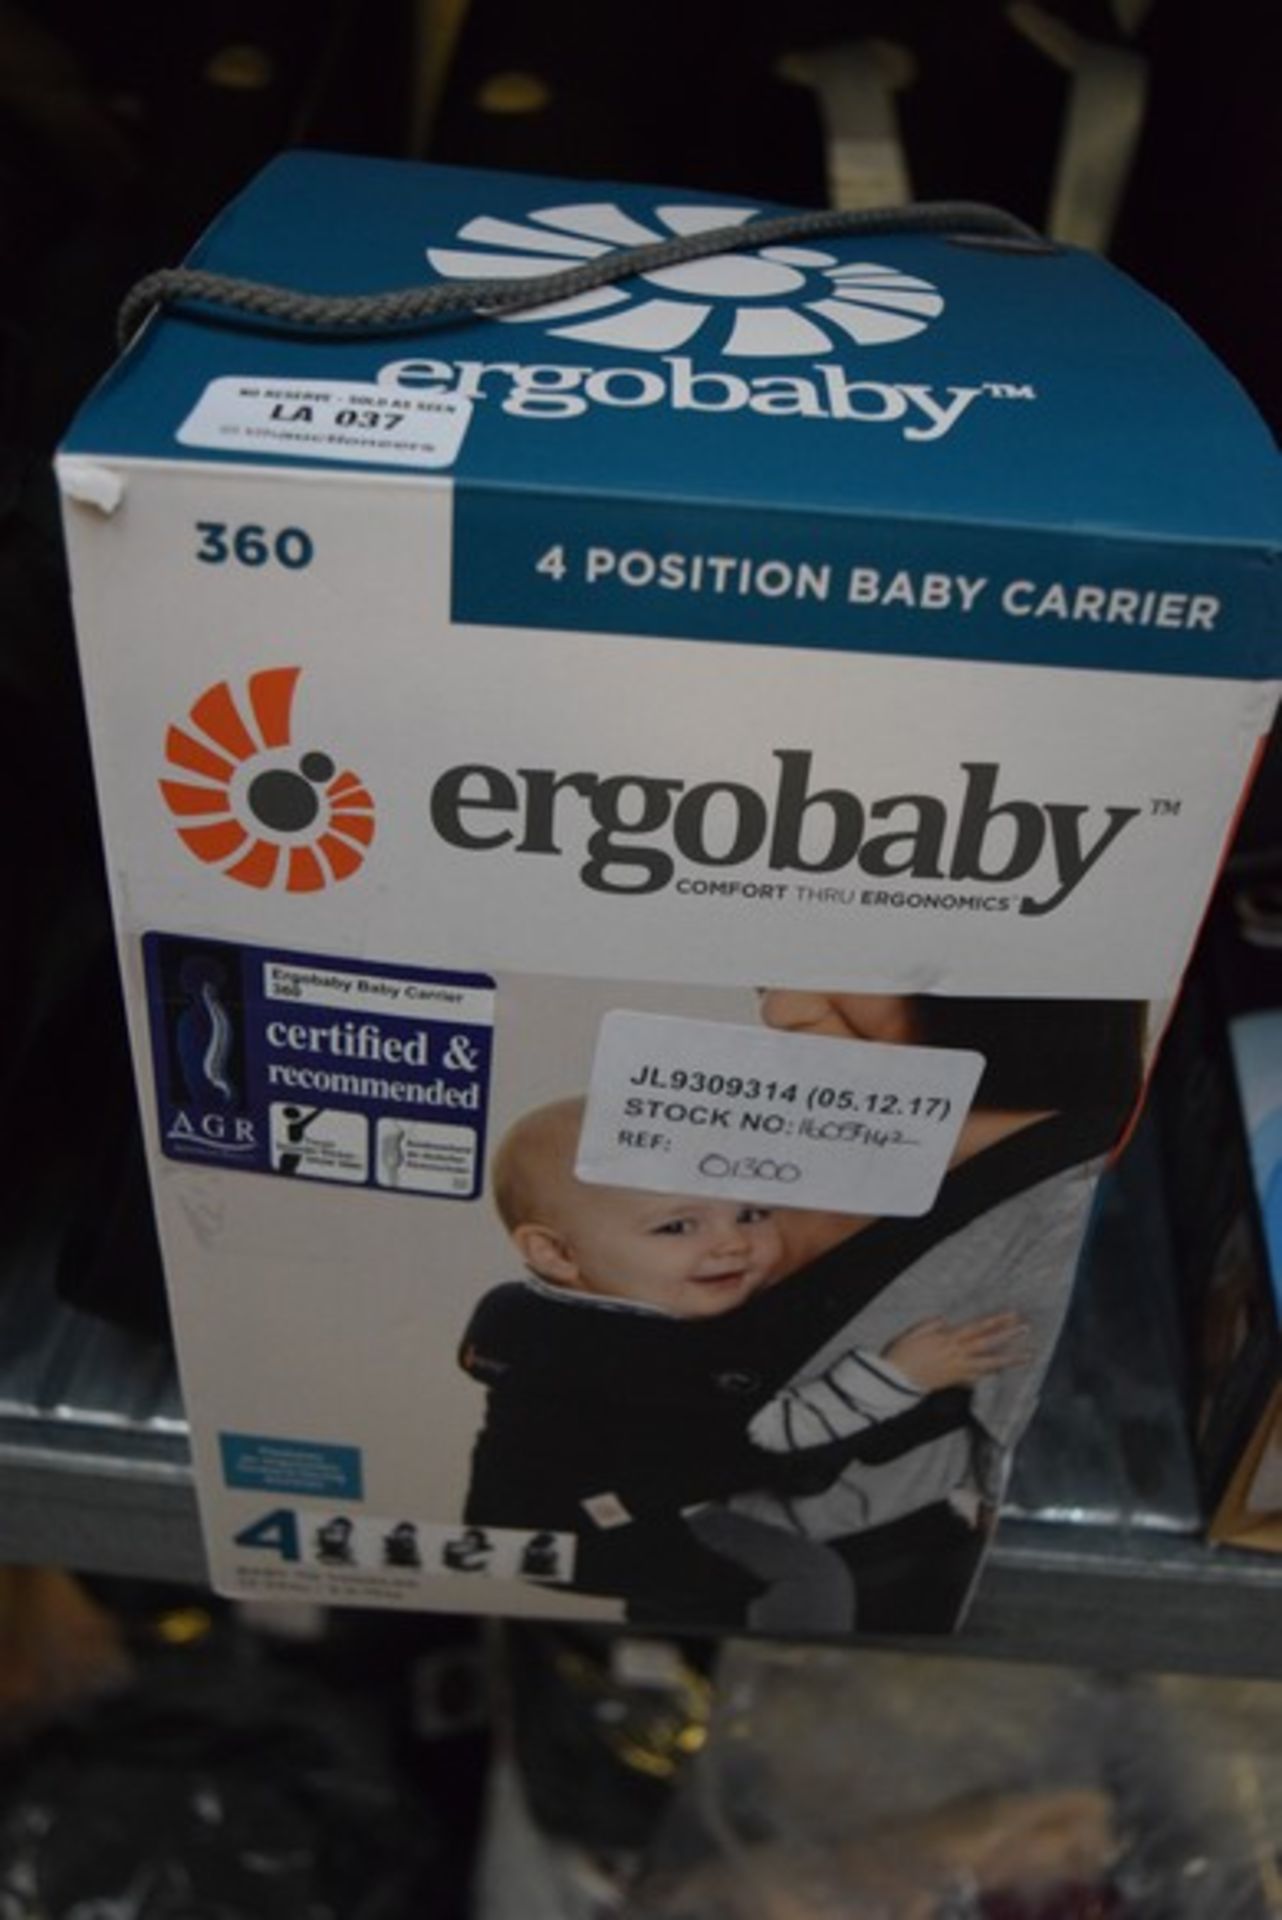 1 x ERGO BABY 4 POSITION BABY CARRIER RRP £130 05.12.17 1605942 *PLEASE NOTE THAT THE BID PRICE IS